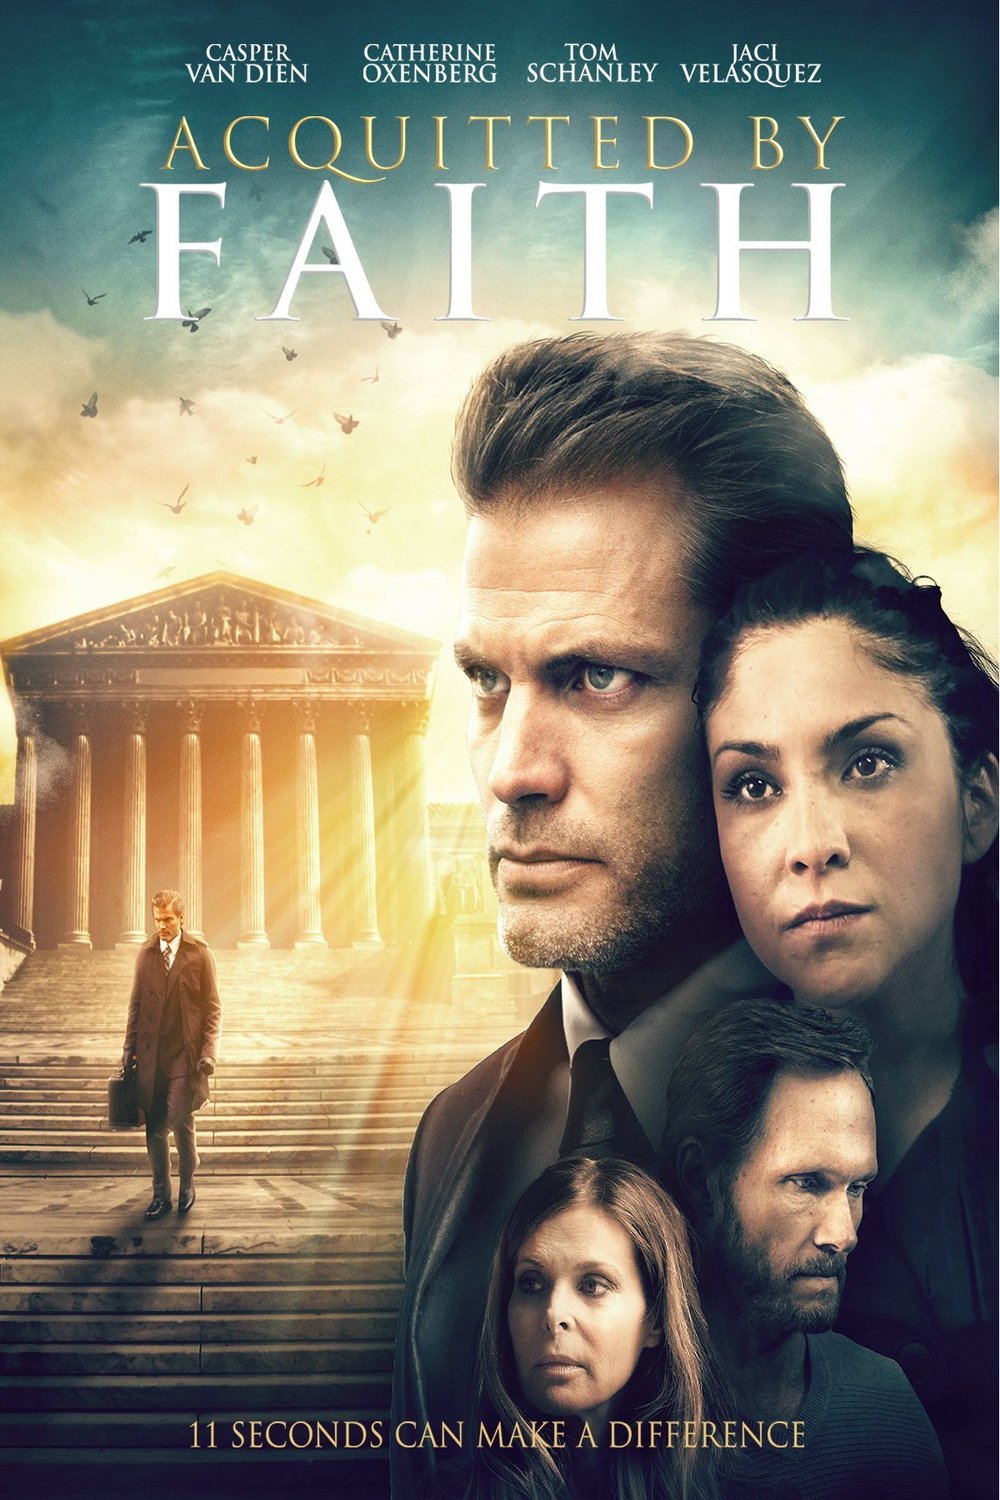 Poster of the movie Acquitted by Faith